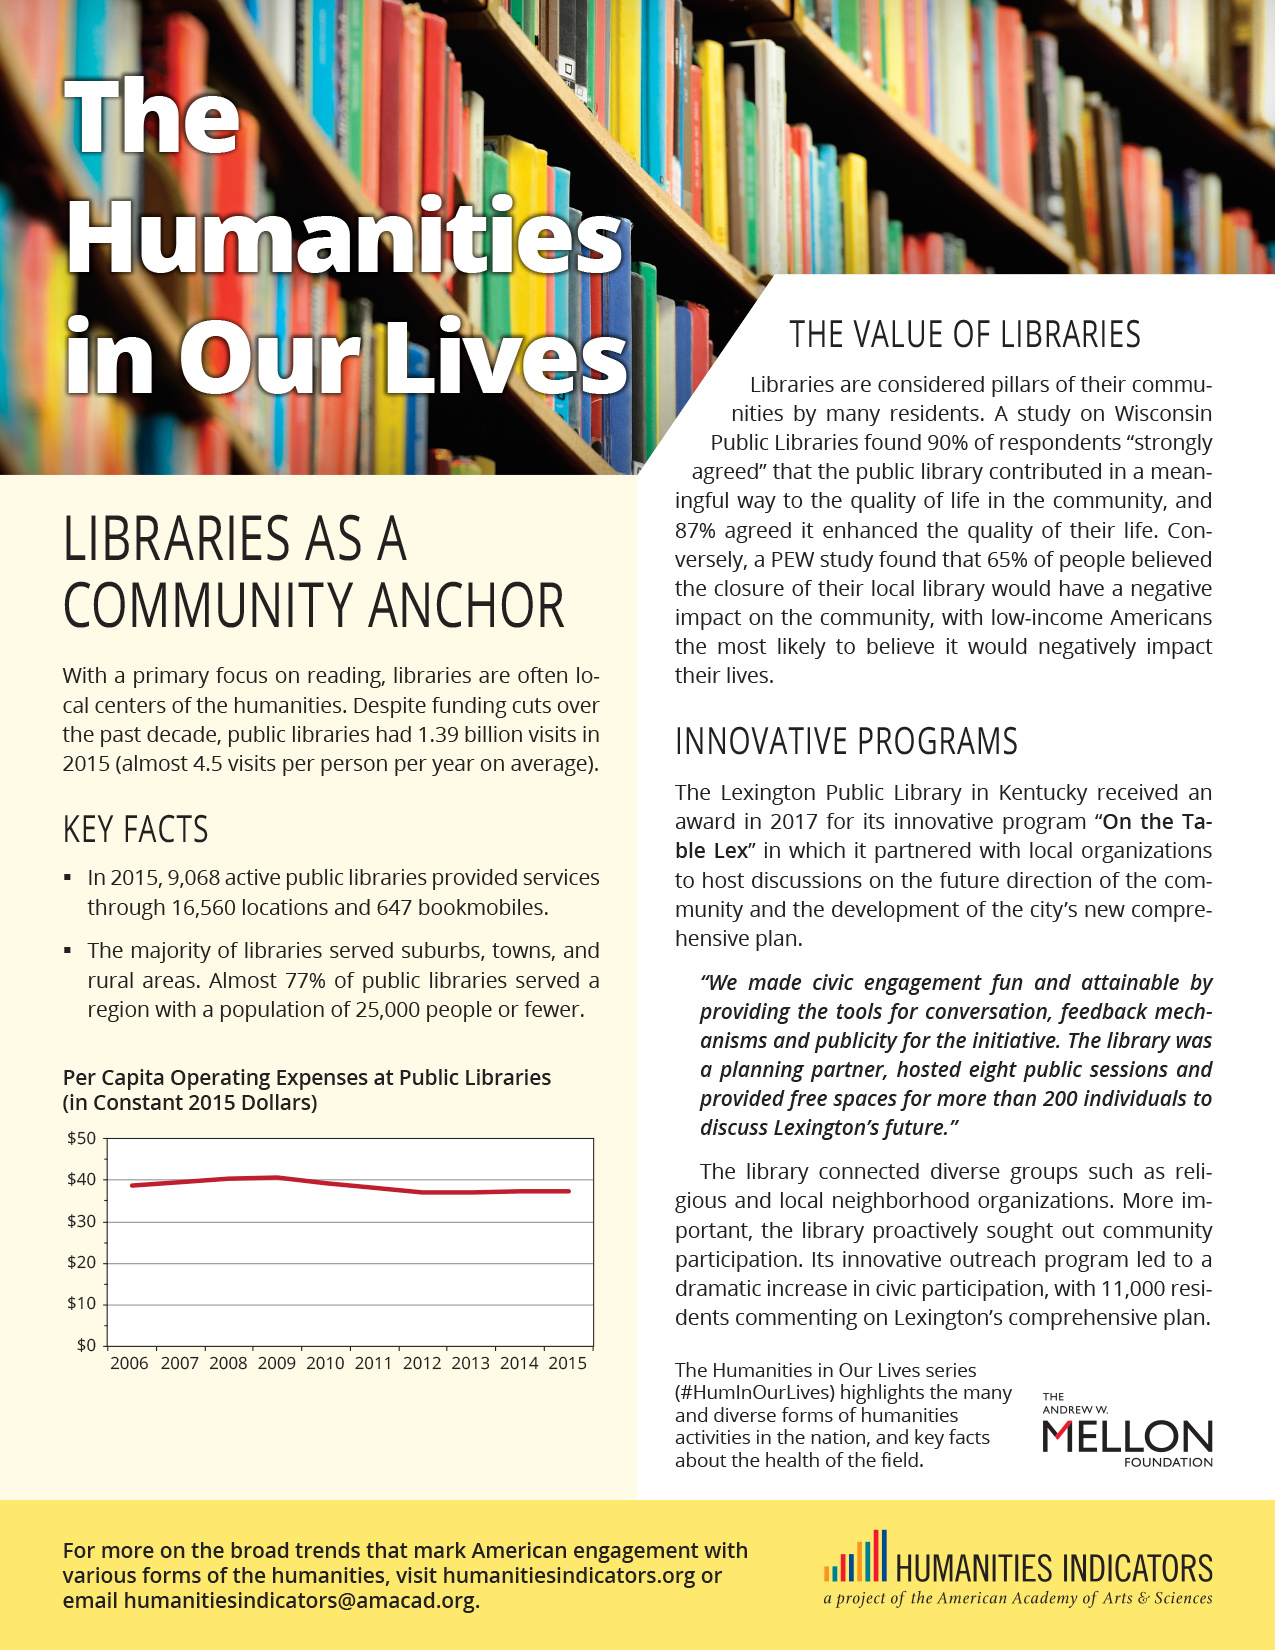 Libraries as Community Anchor